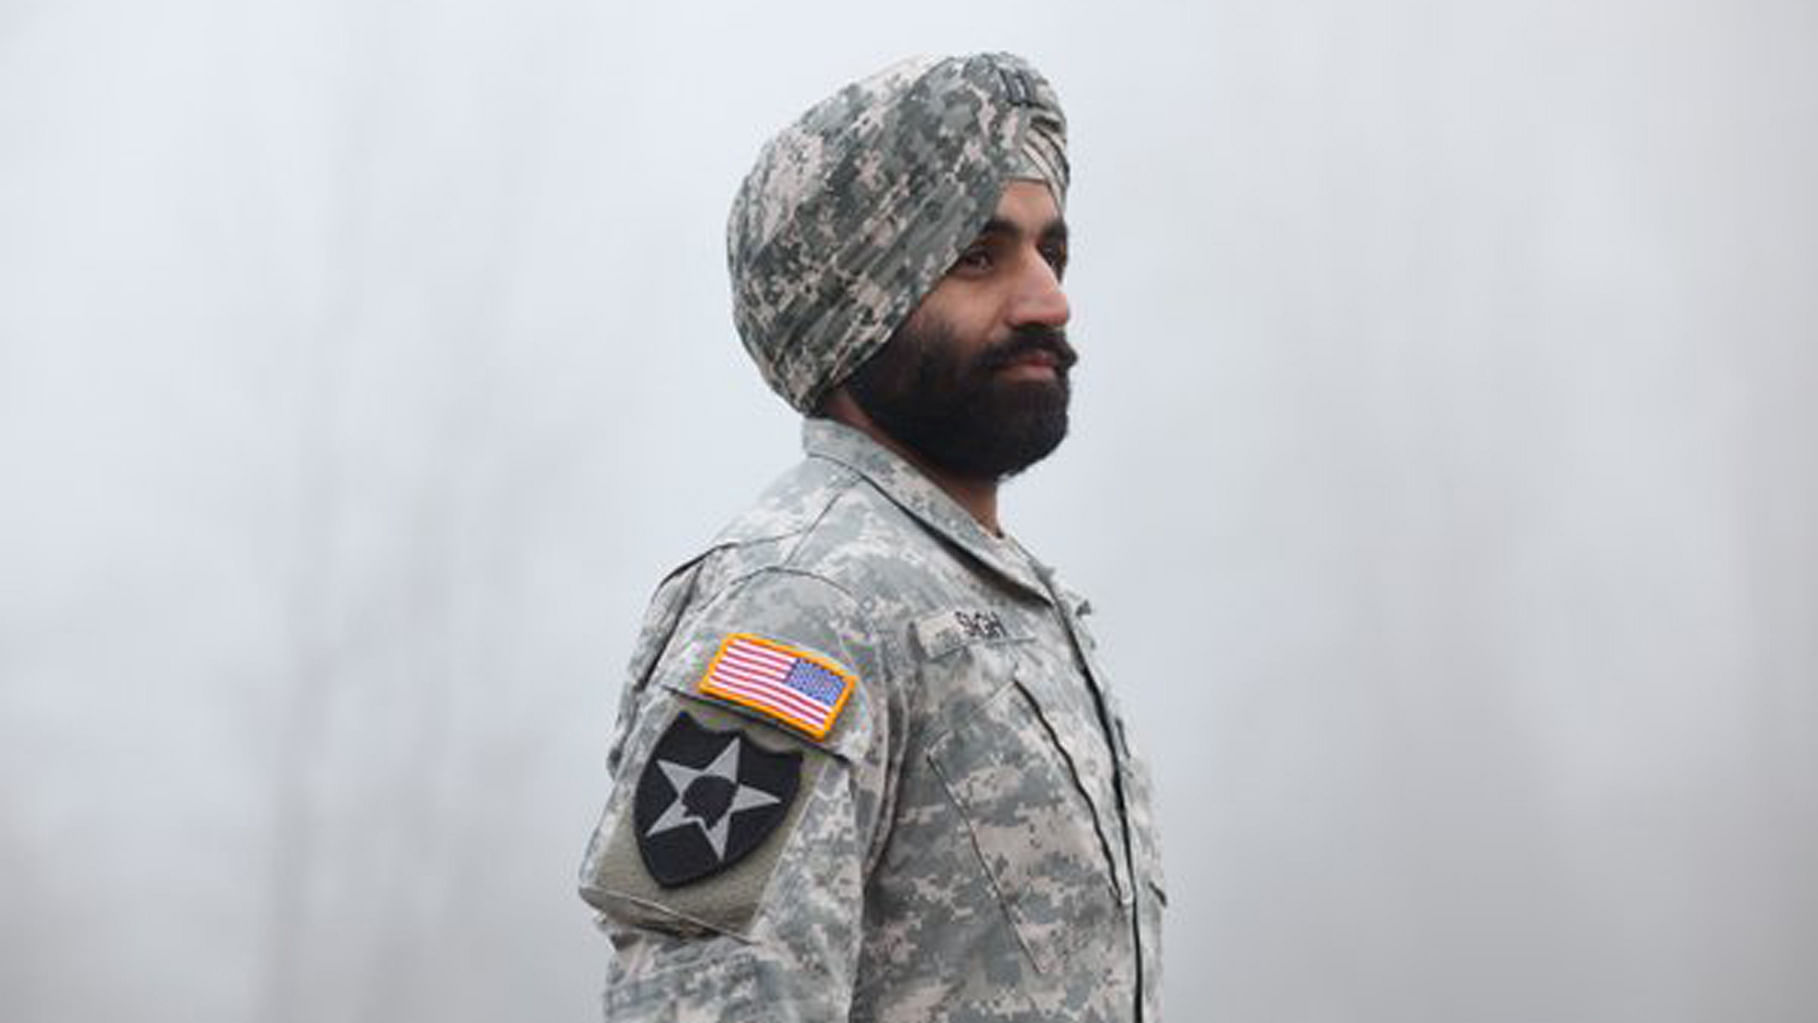 Captain Simratpal Singh. (Photo Courtesy: Twitter/<a href="https://twitter.com/SikhProf">@SikhProf</a>)